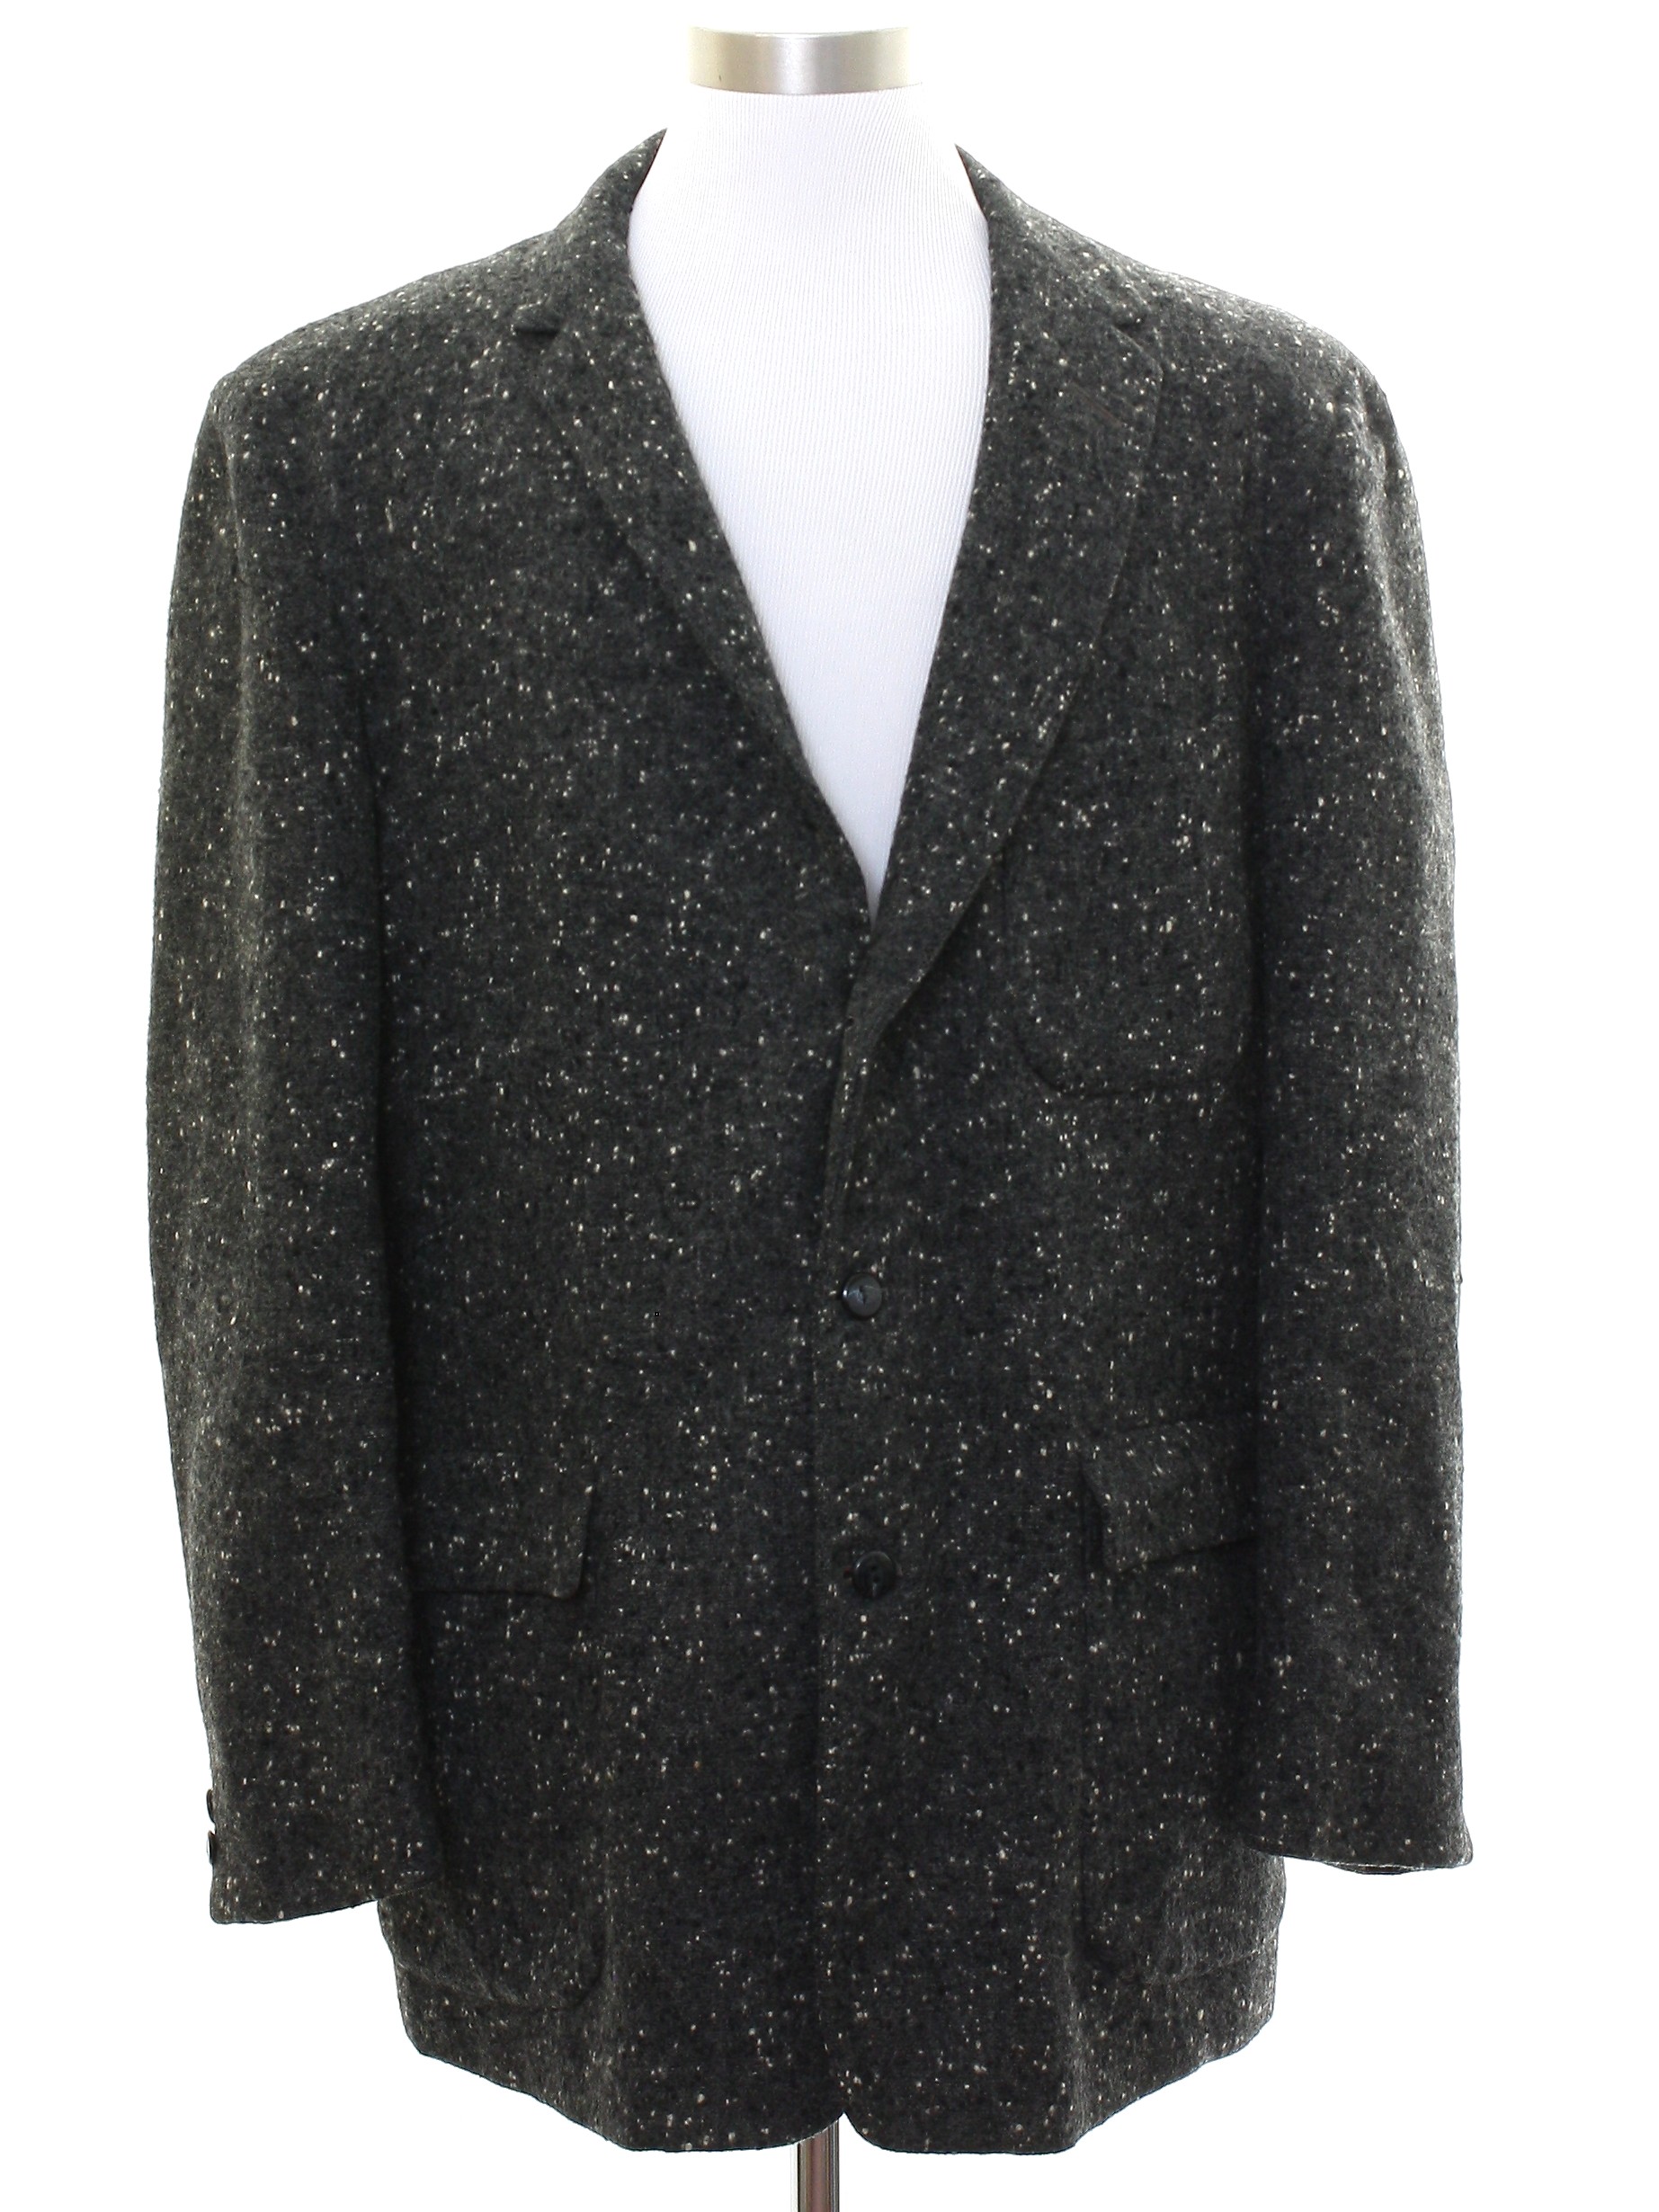 Vintage 1950's Jacket: Late 50s -Gentry- Mens charcoal background wool ...